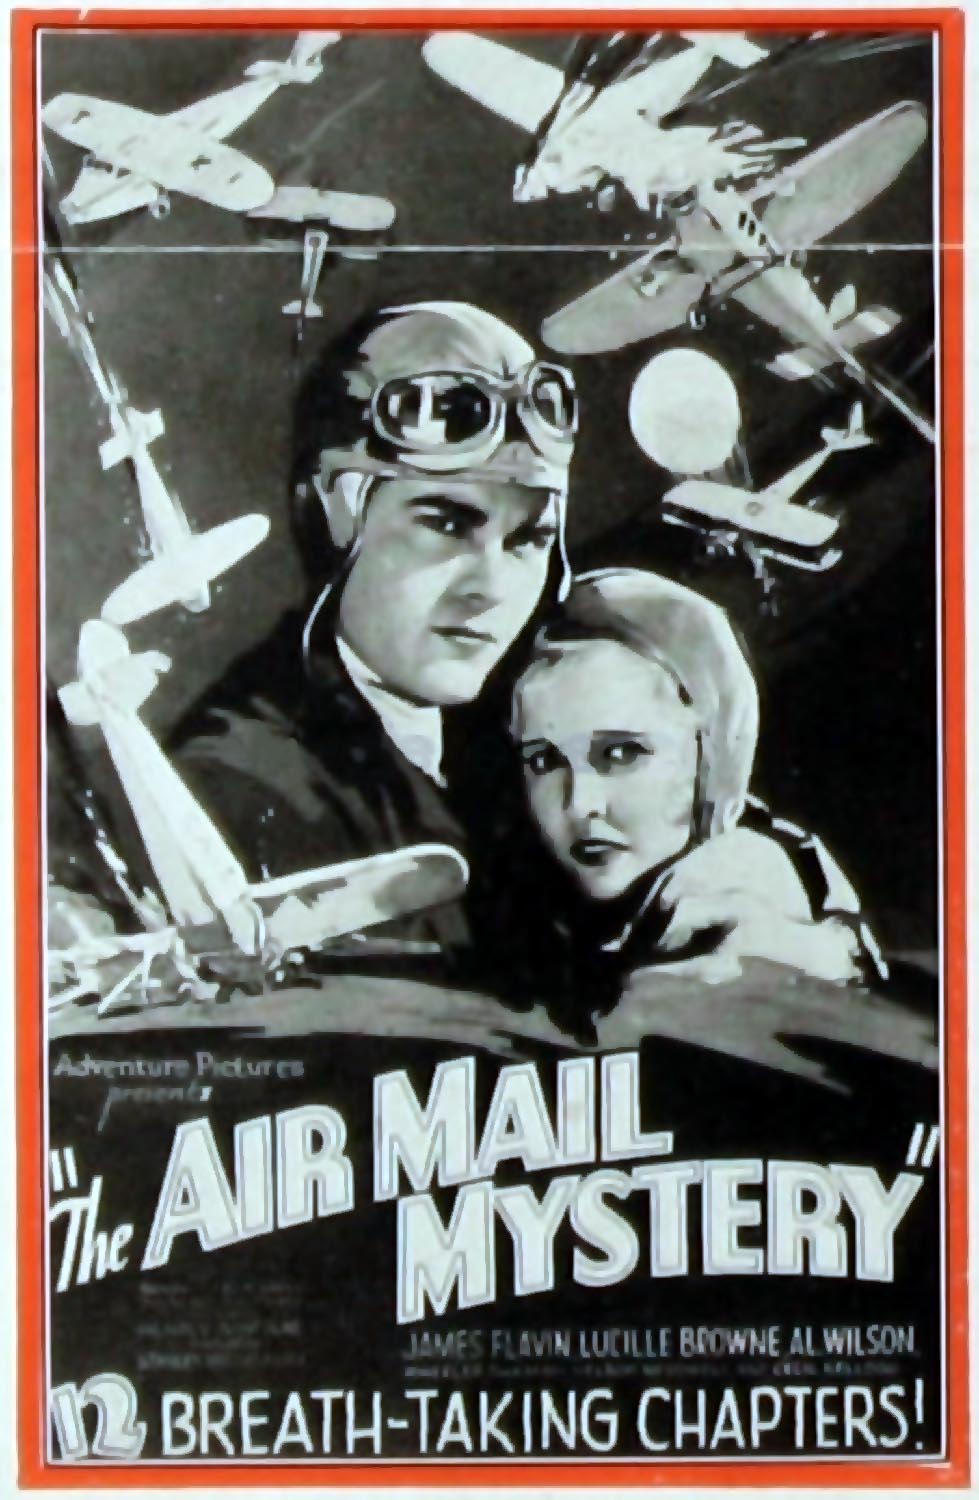 AIRMAIL MYSTERY, THE